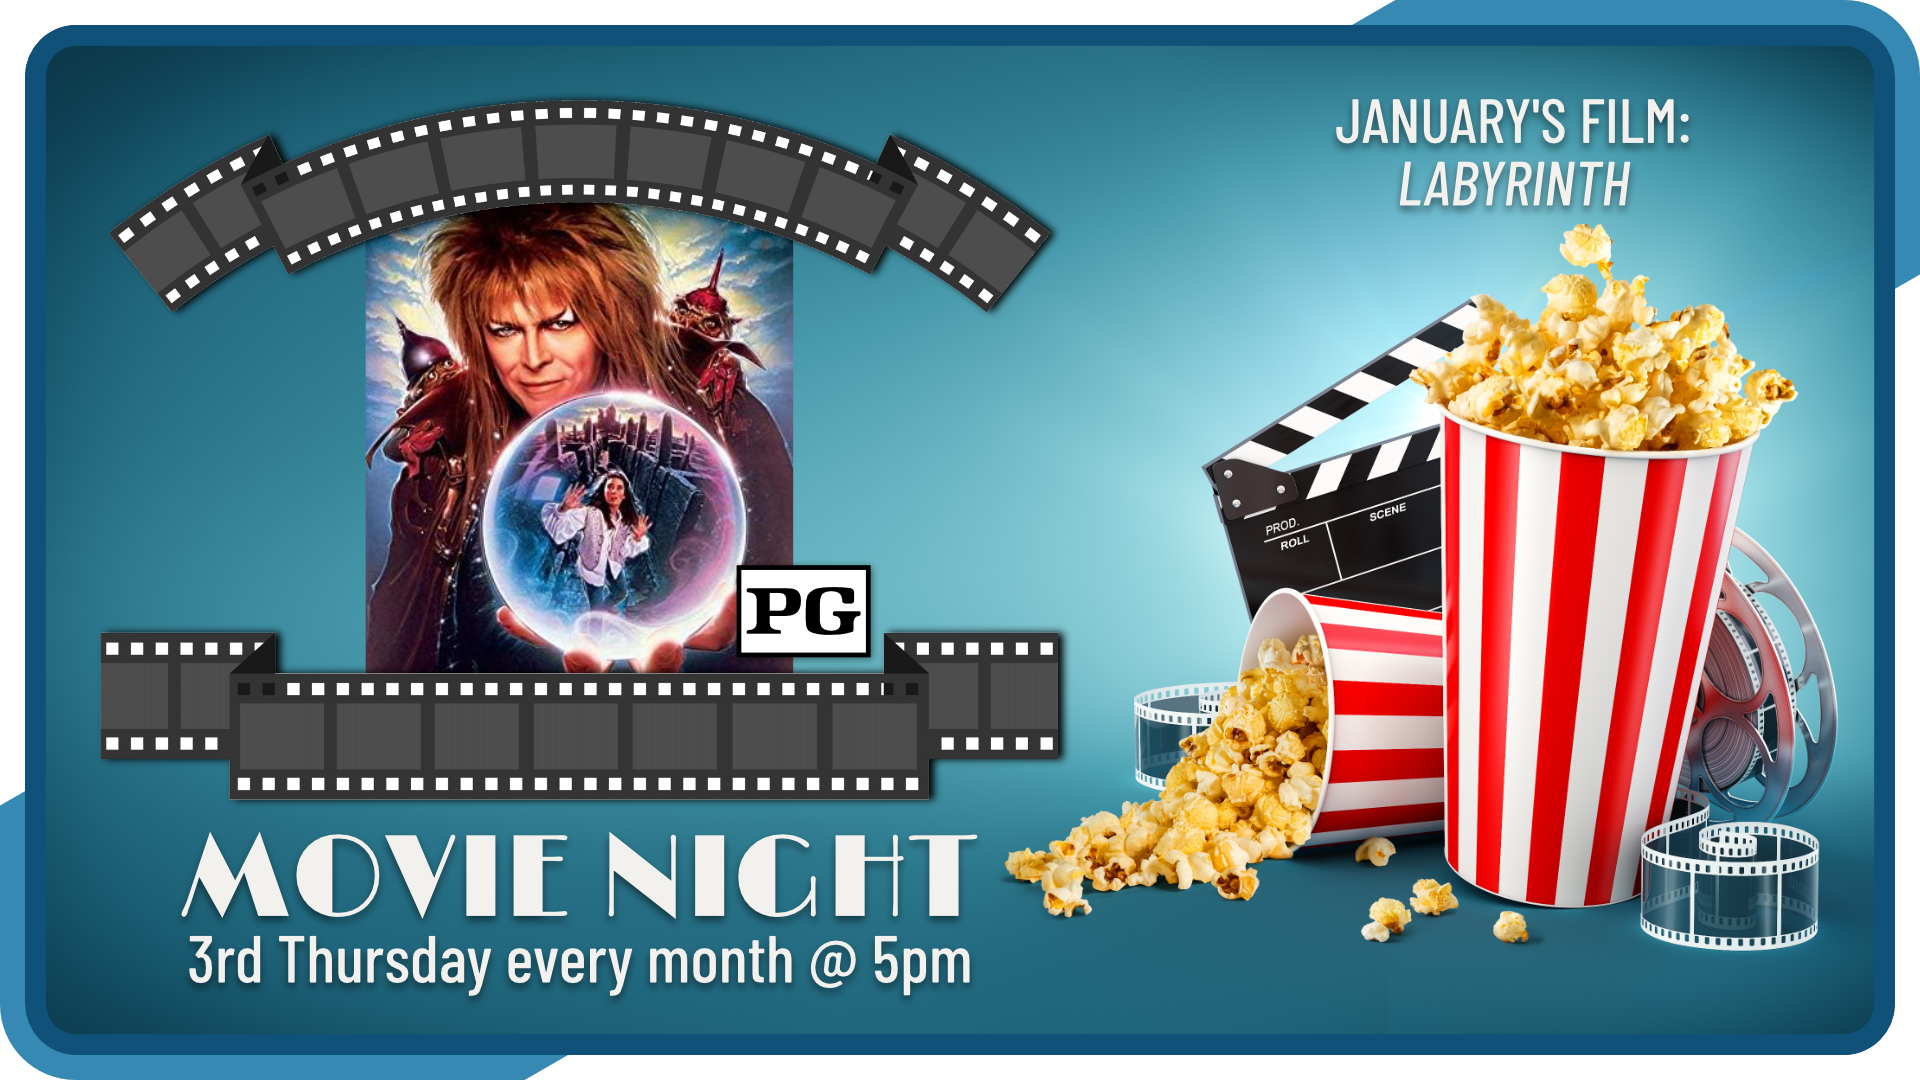 Movie Night, third Thursday monthly at 5pm, intended age groups vary by film rating